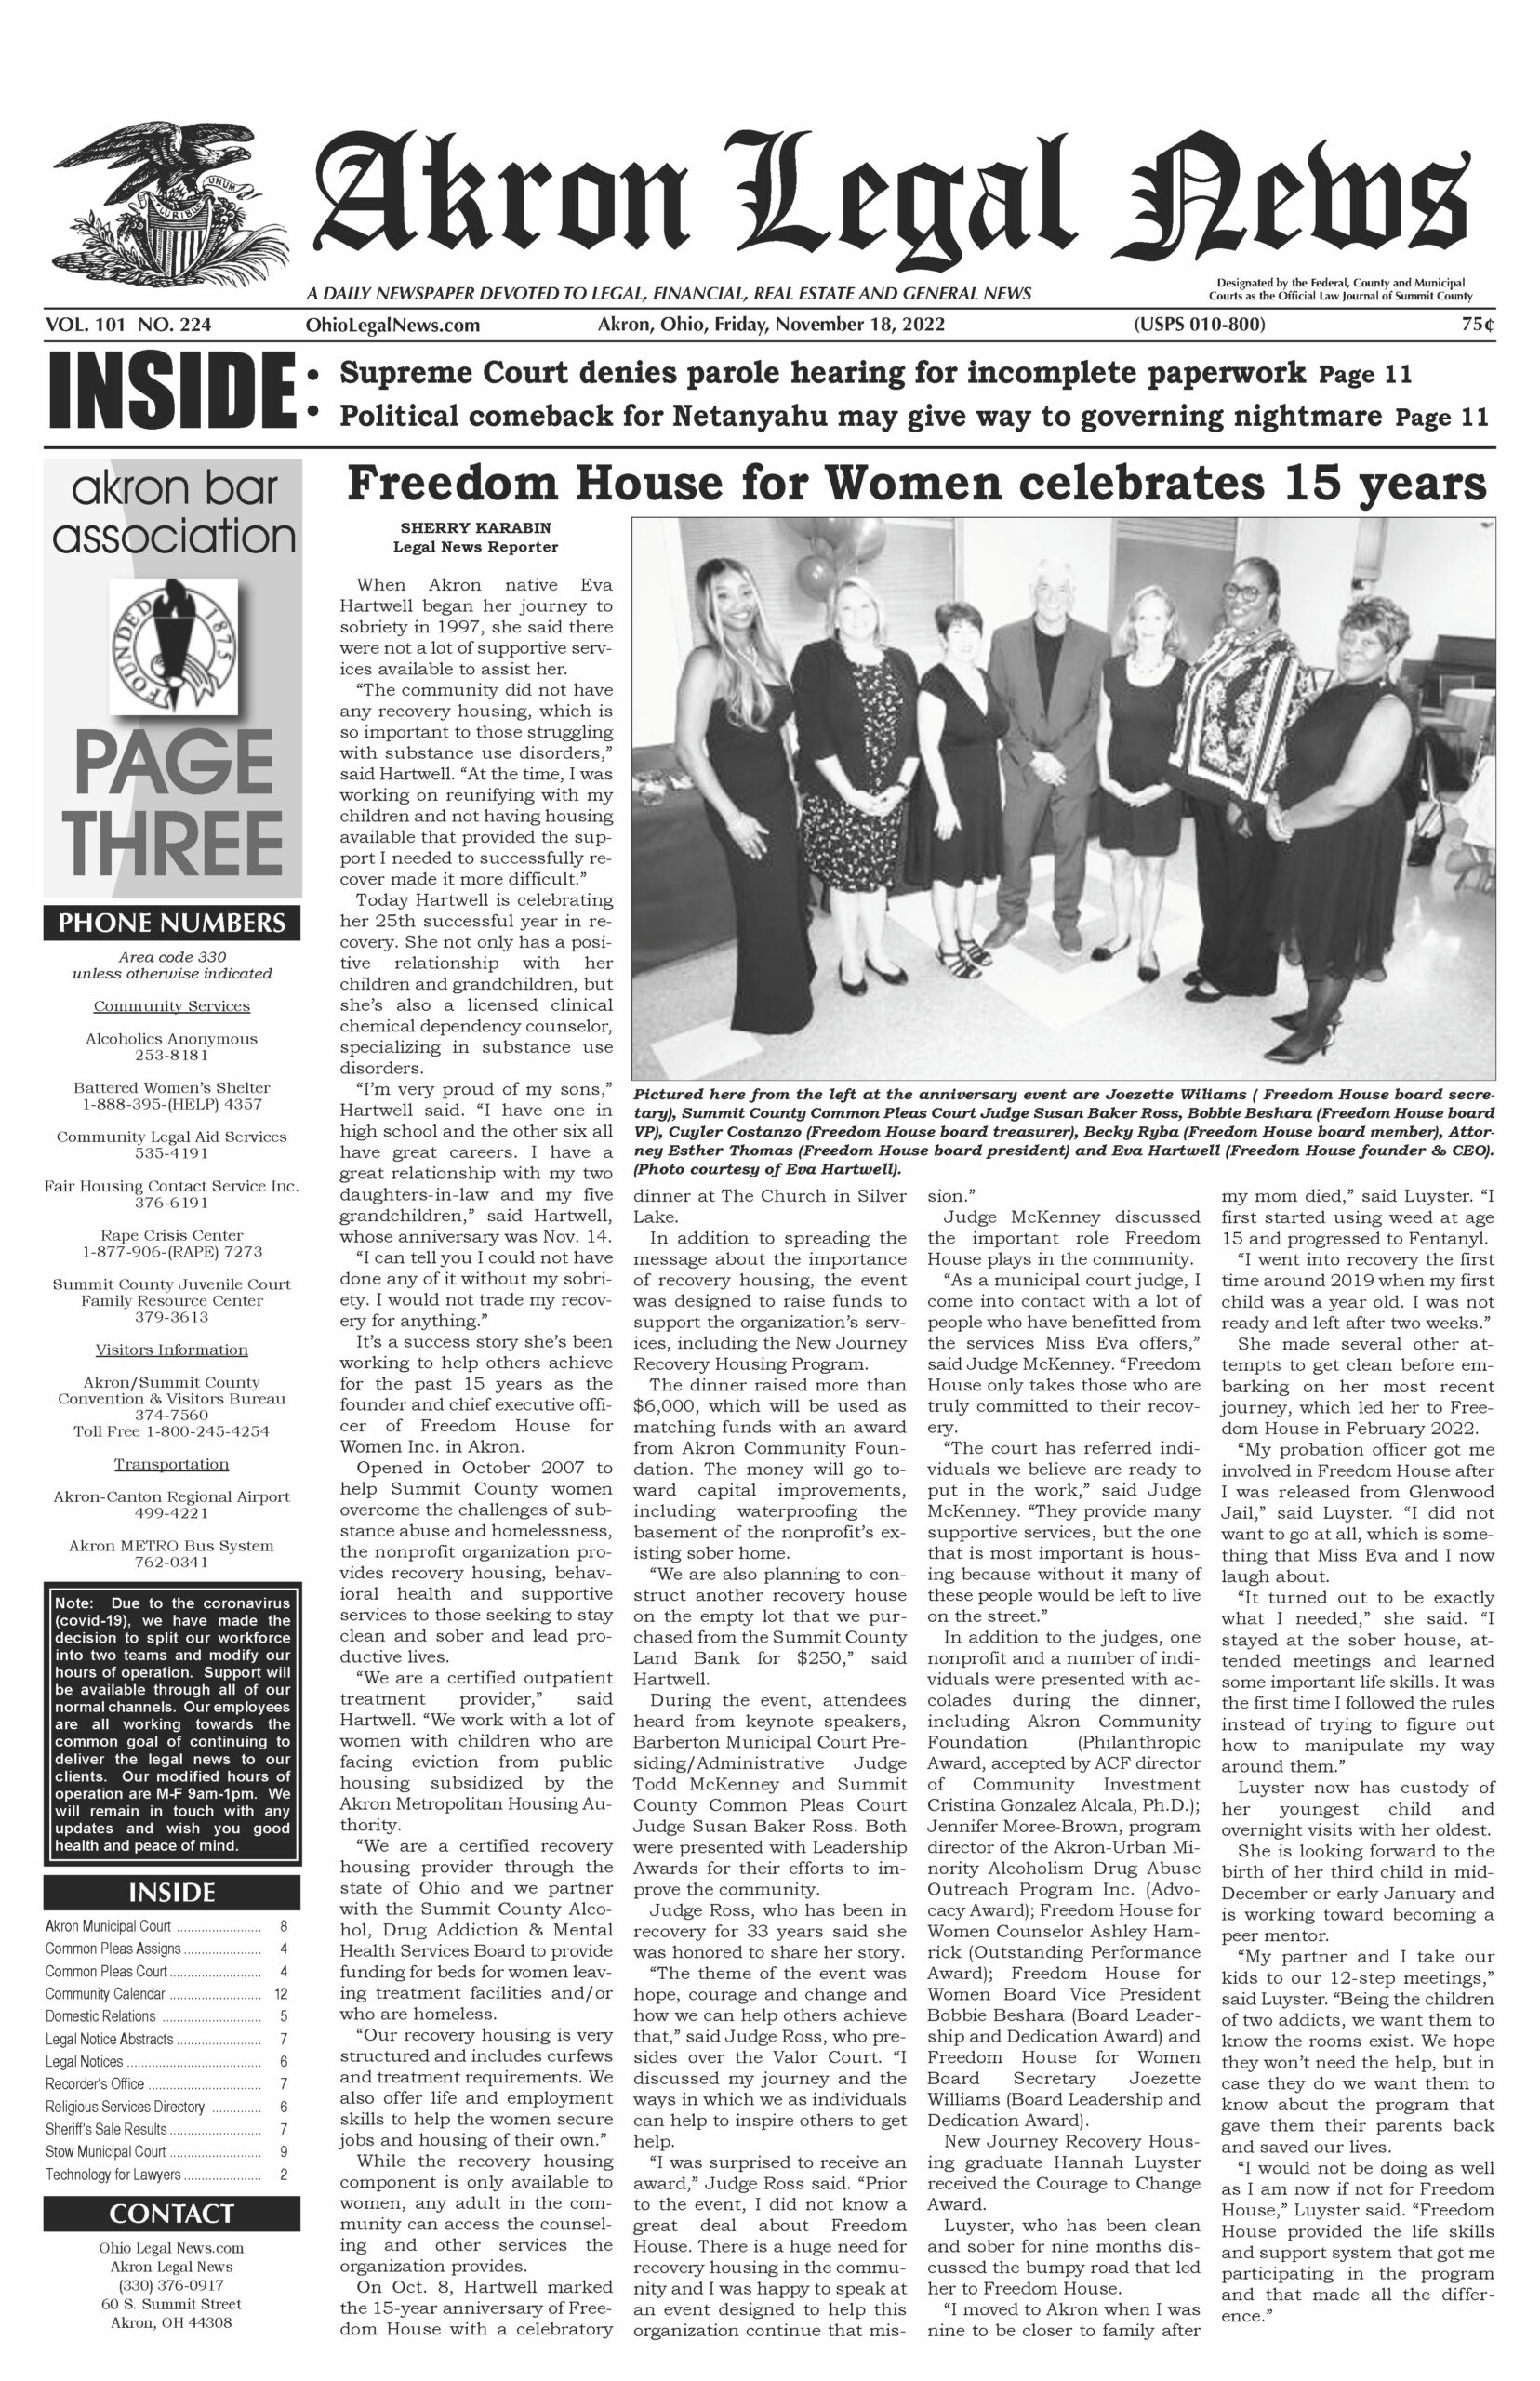 AKRON LEGAL NEWS 15 YEAR DINNER ARTICLE